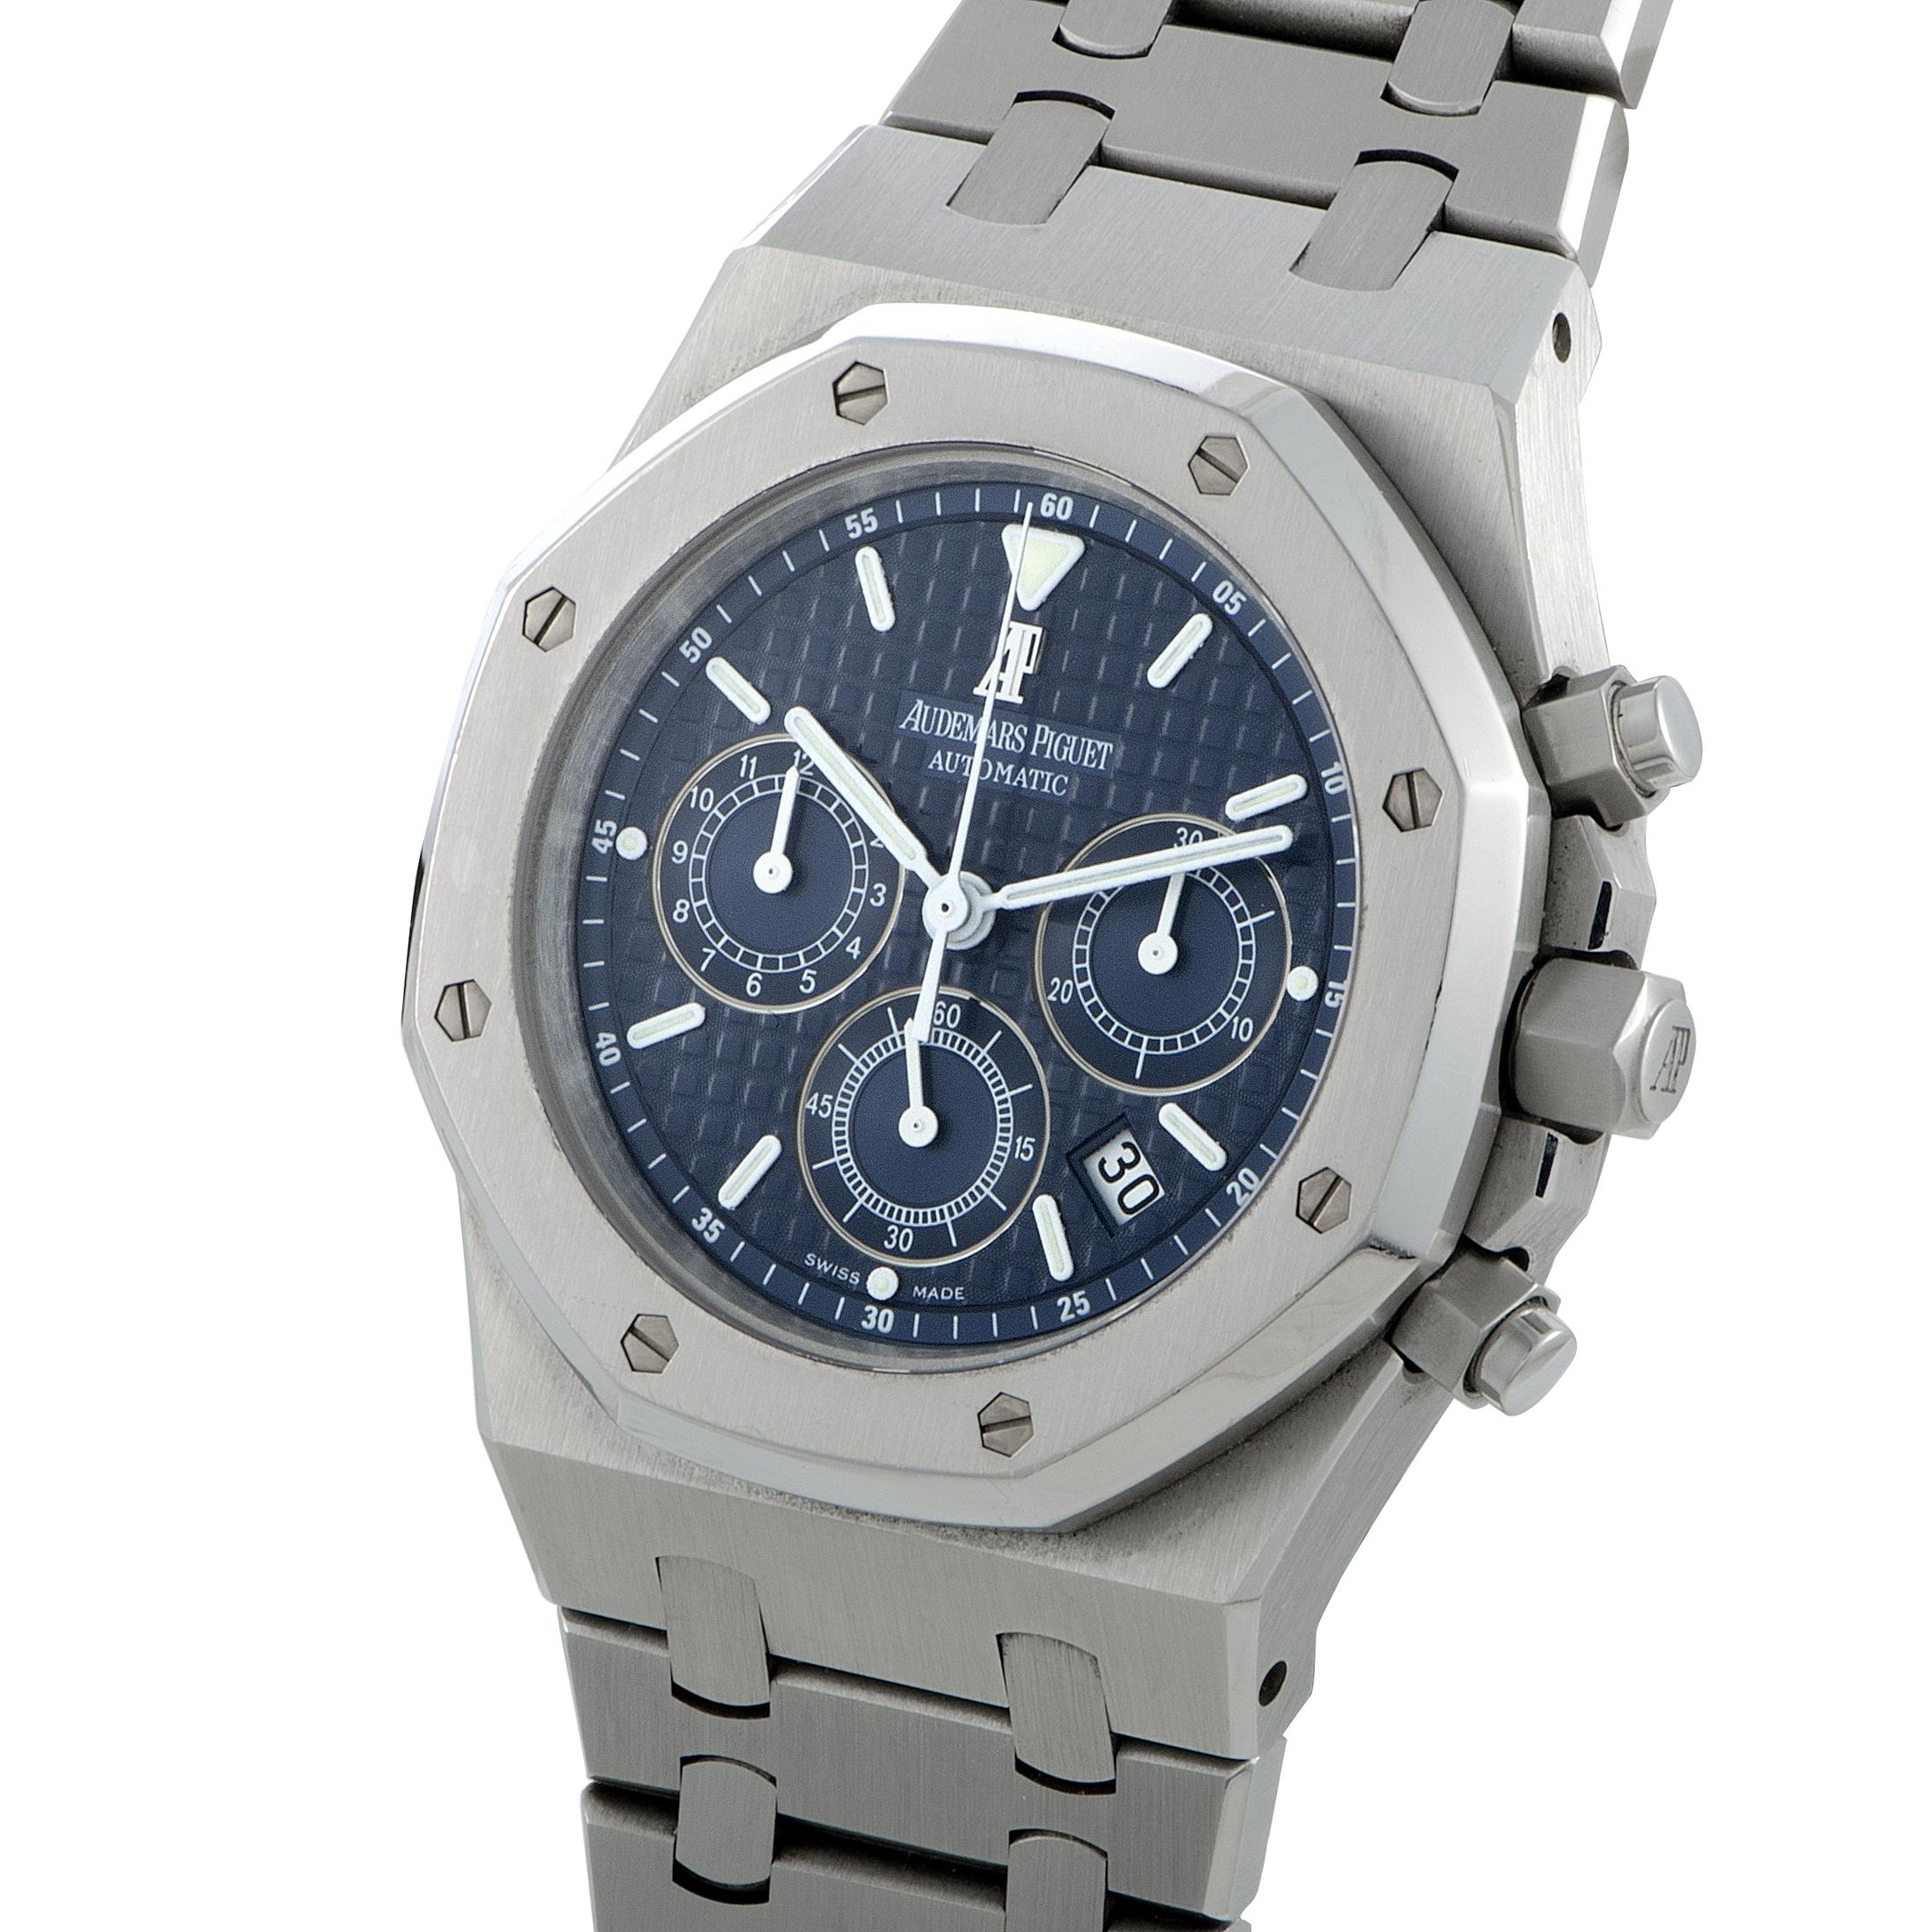 Remarkably robust, ergonomically sophisticated, and exquisitely crafted, the instantly recognizable “Royal Oak” case is virtually seamlessly integrated with the bracelet in this superb timepiece form Audemars Piguet that offers elaborate and highly